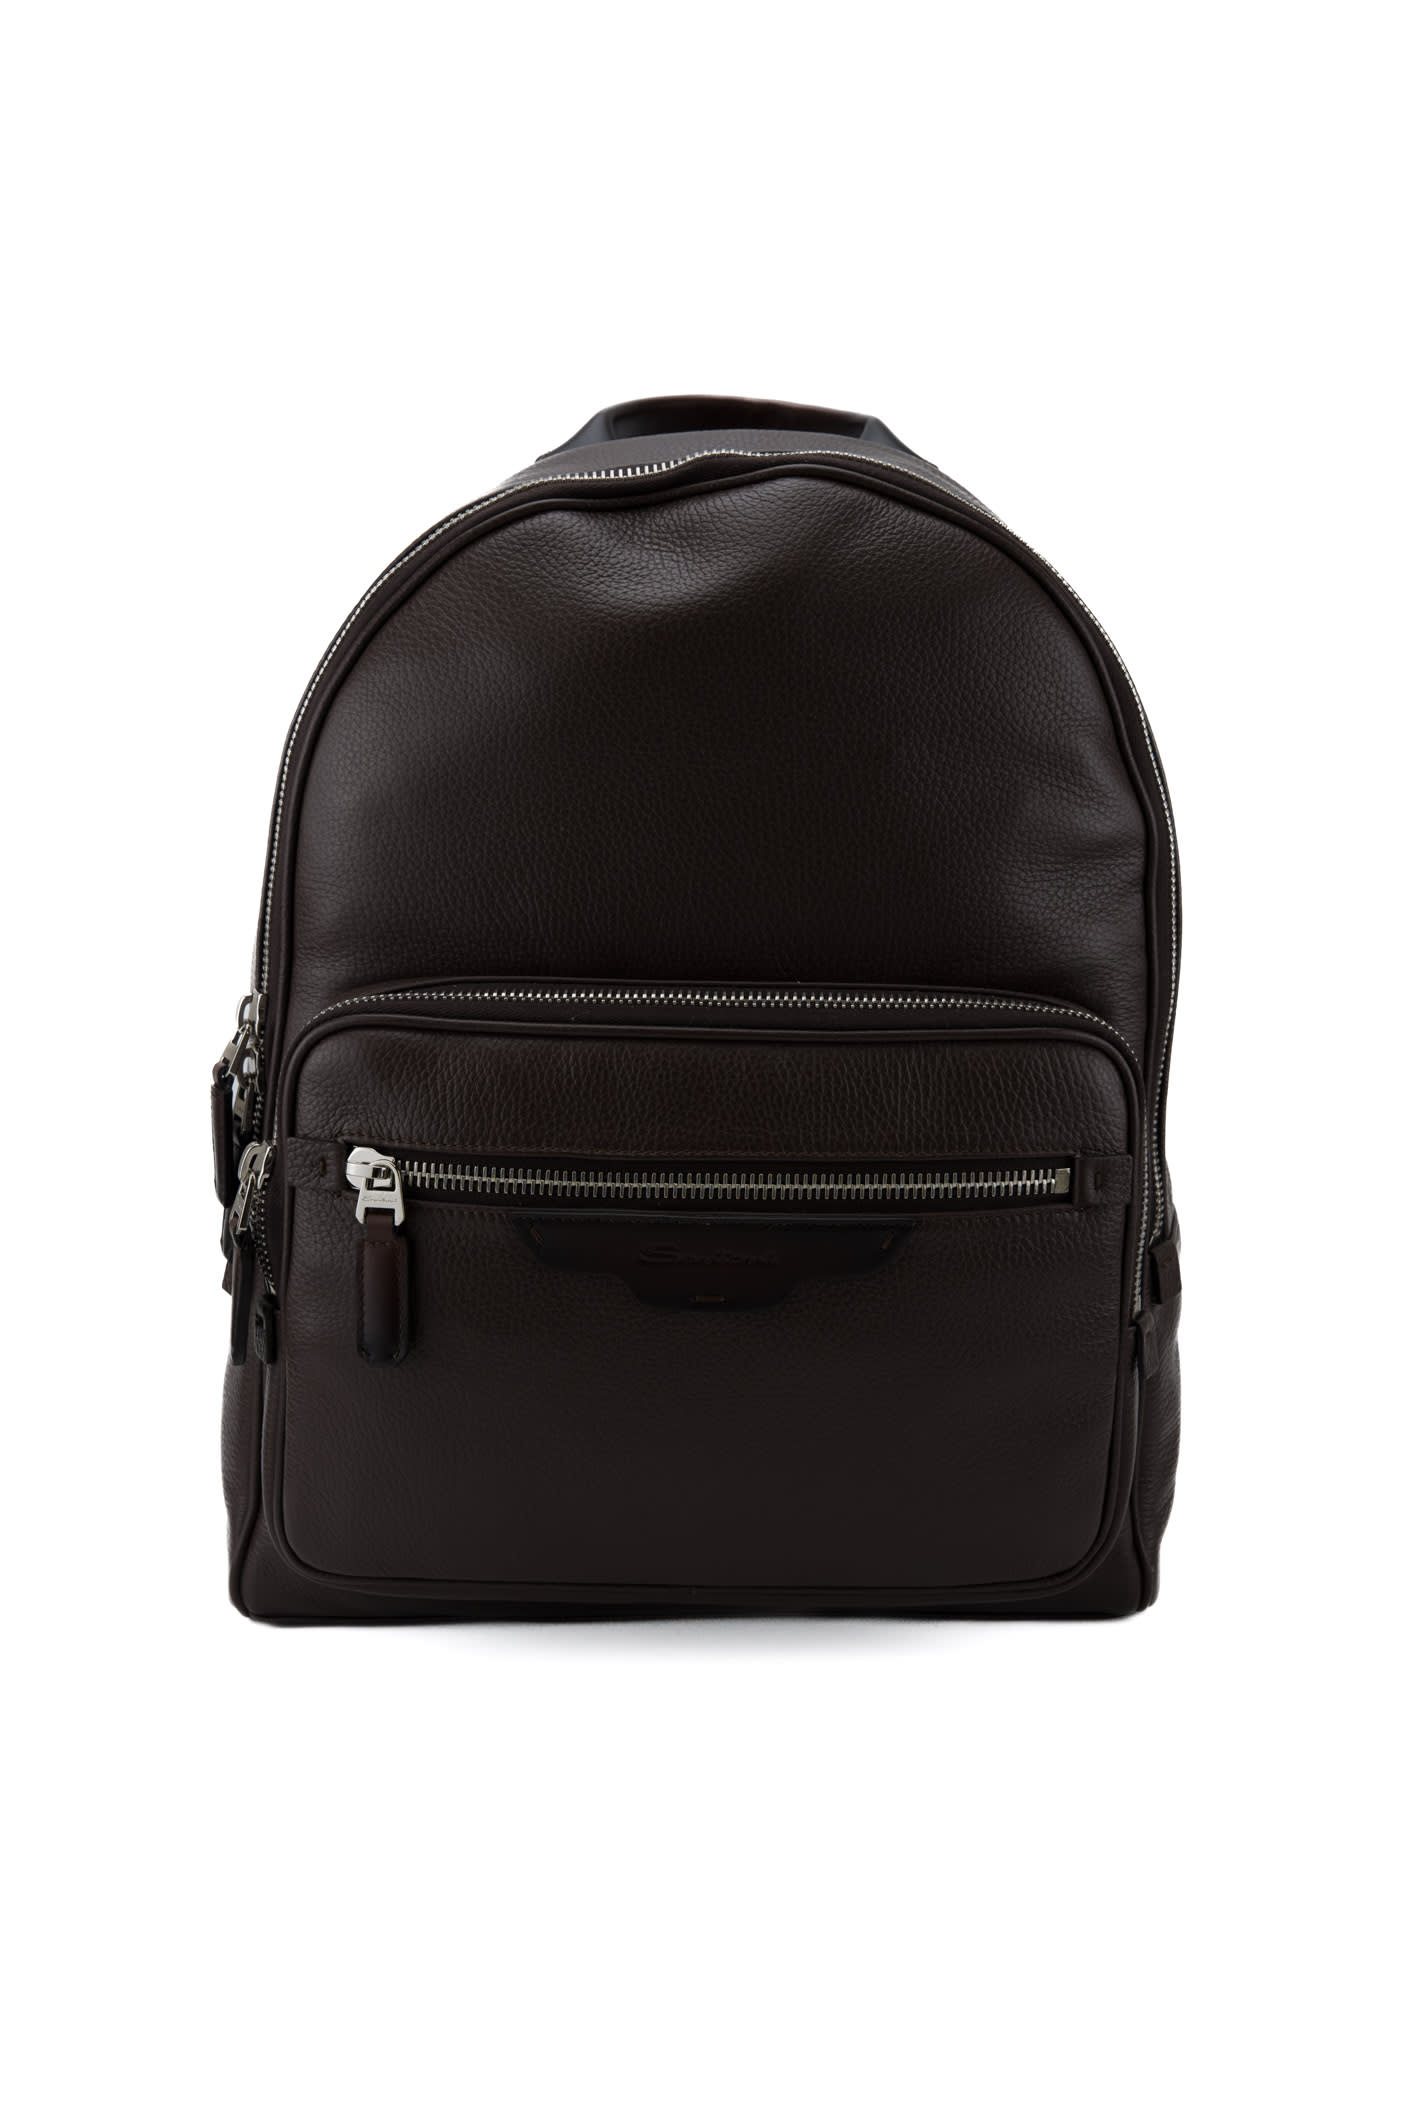 Entry Level Backpack In Brown Leather